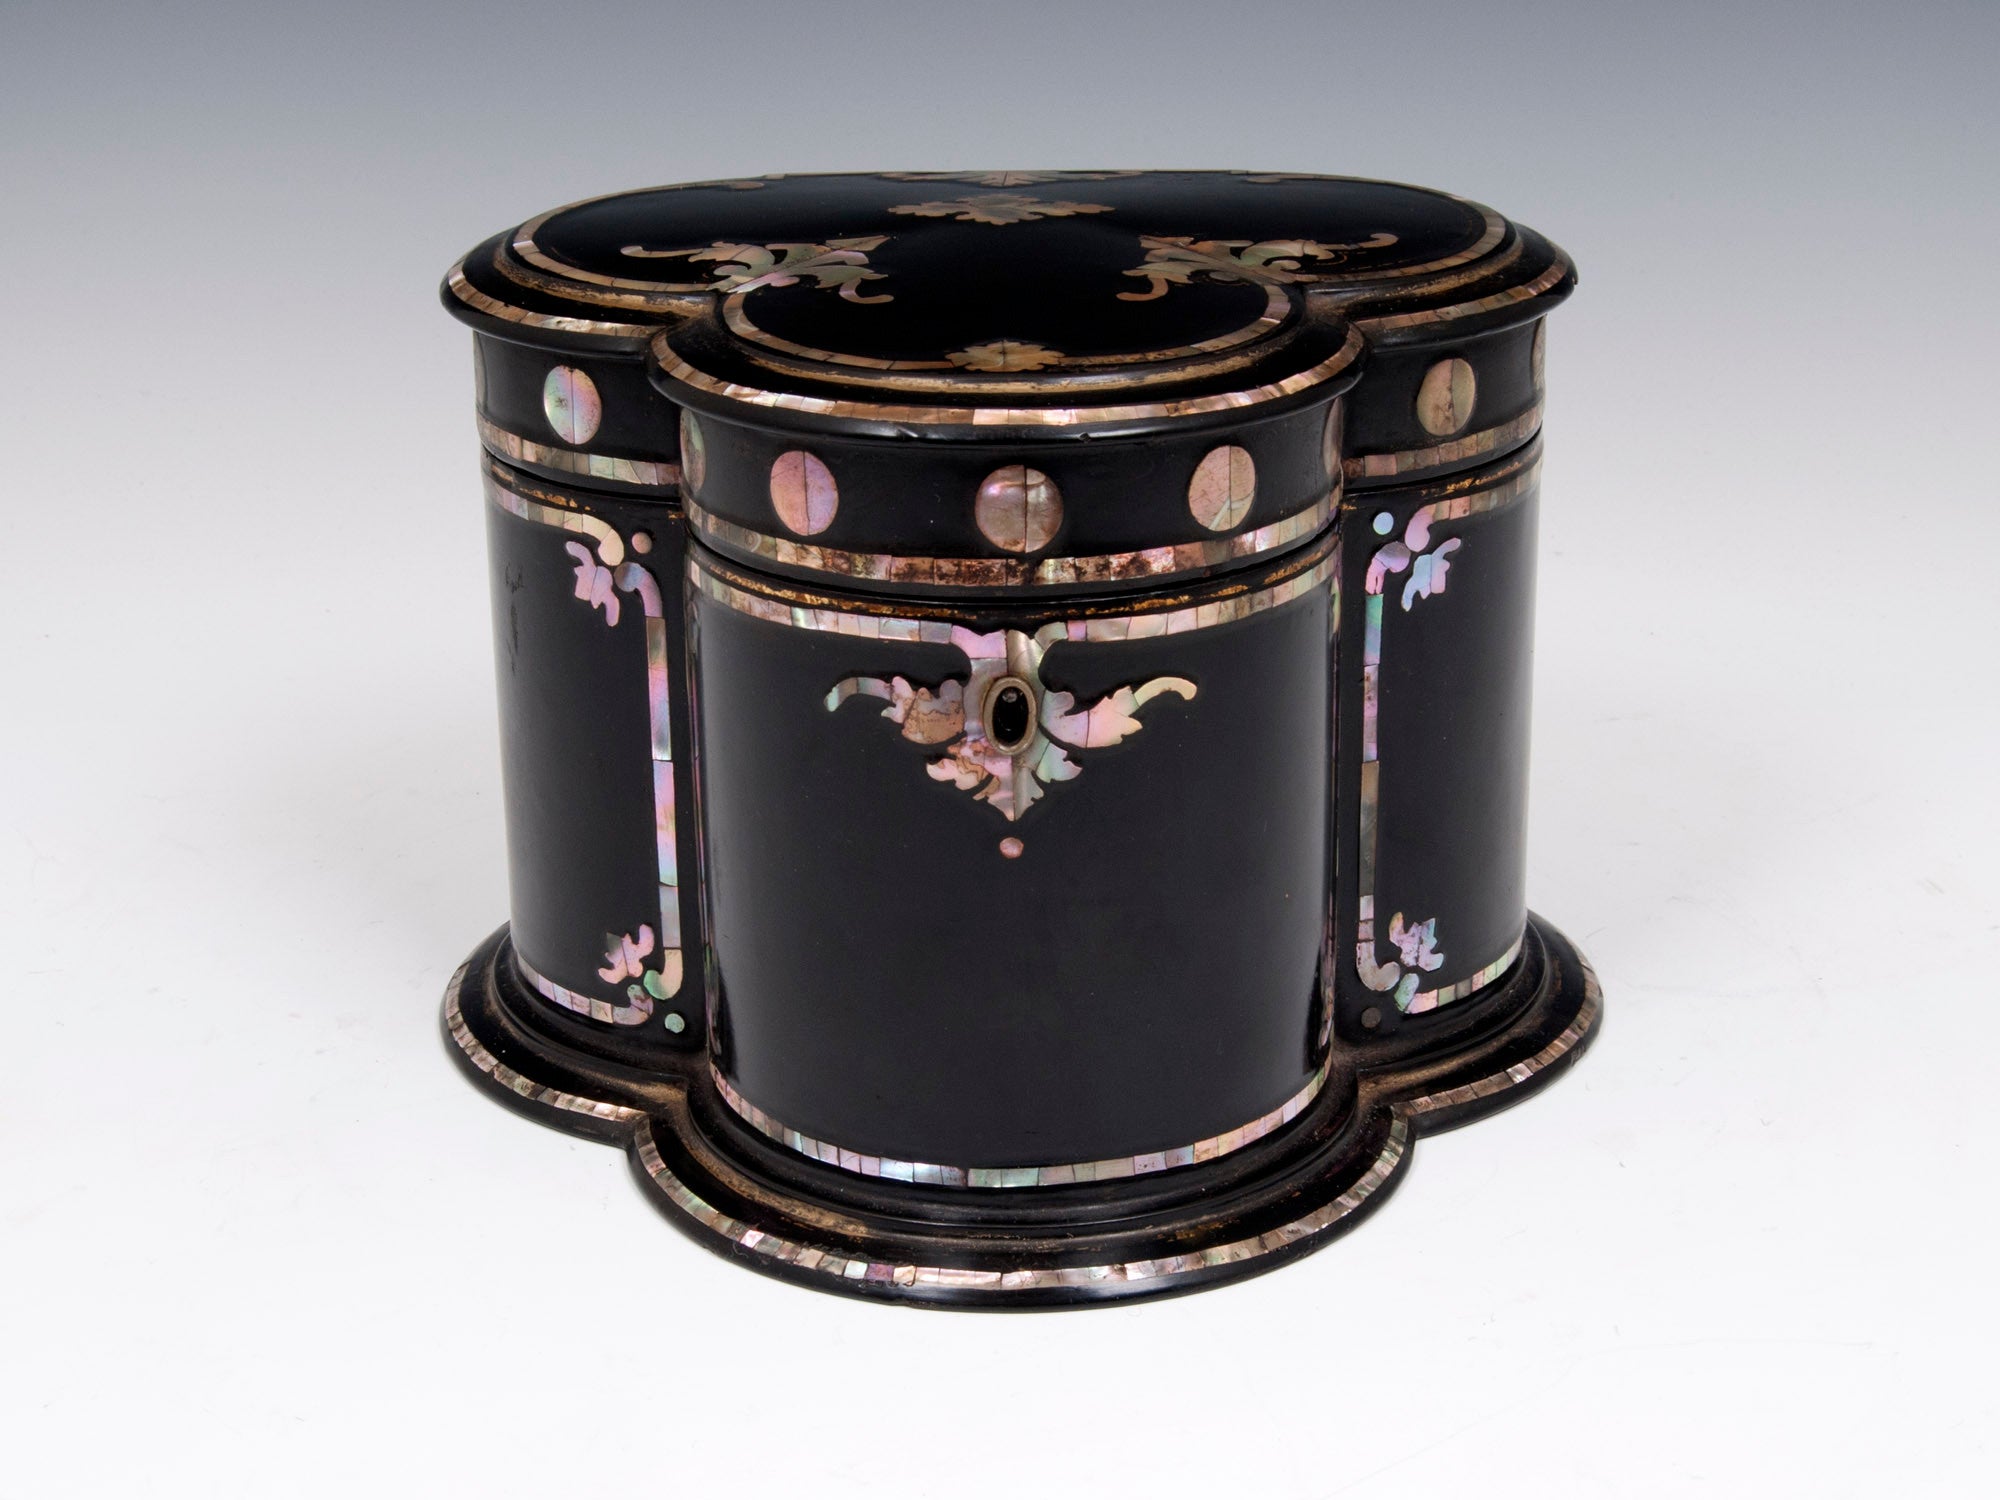 Jennens & Bettridge Papier Mache and Mother of Pearl Tea Caddy 